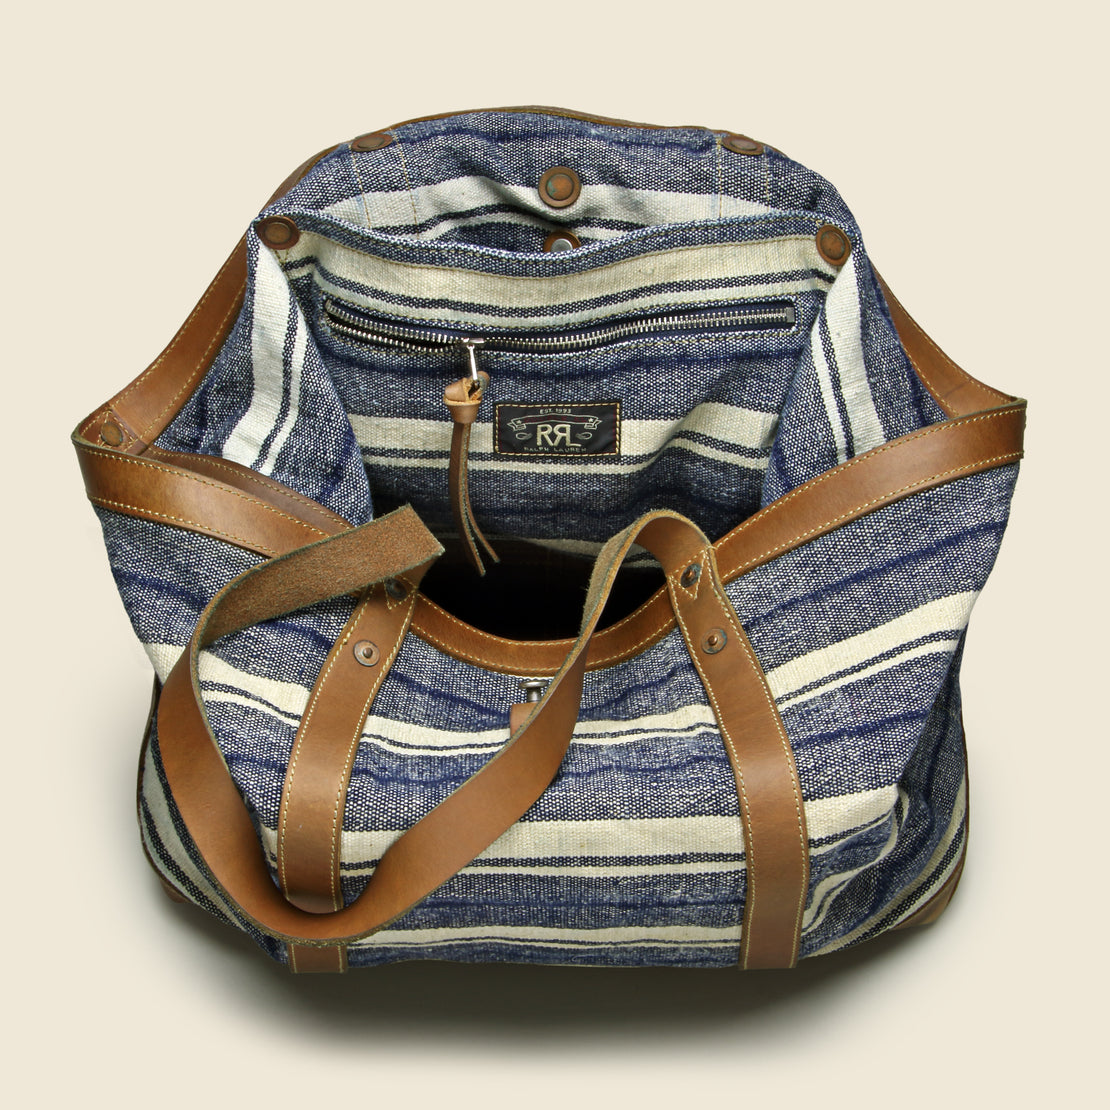 Murphy Canvas Tote - Indigo/Tan - RRL - STAG Provisions - Accessories - Bags / Luggage